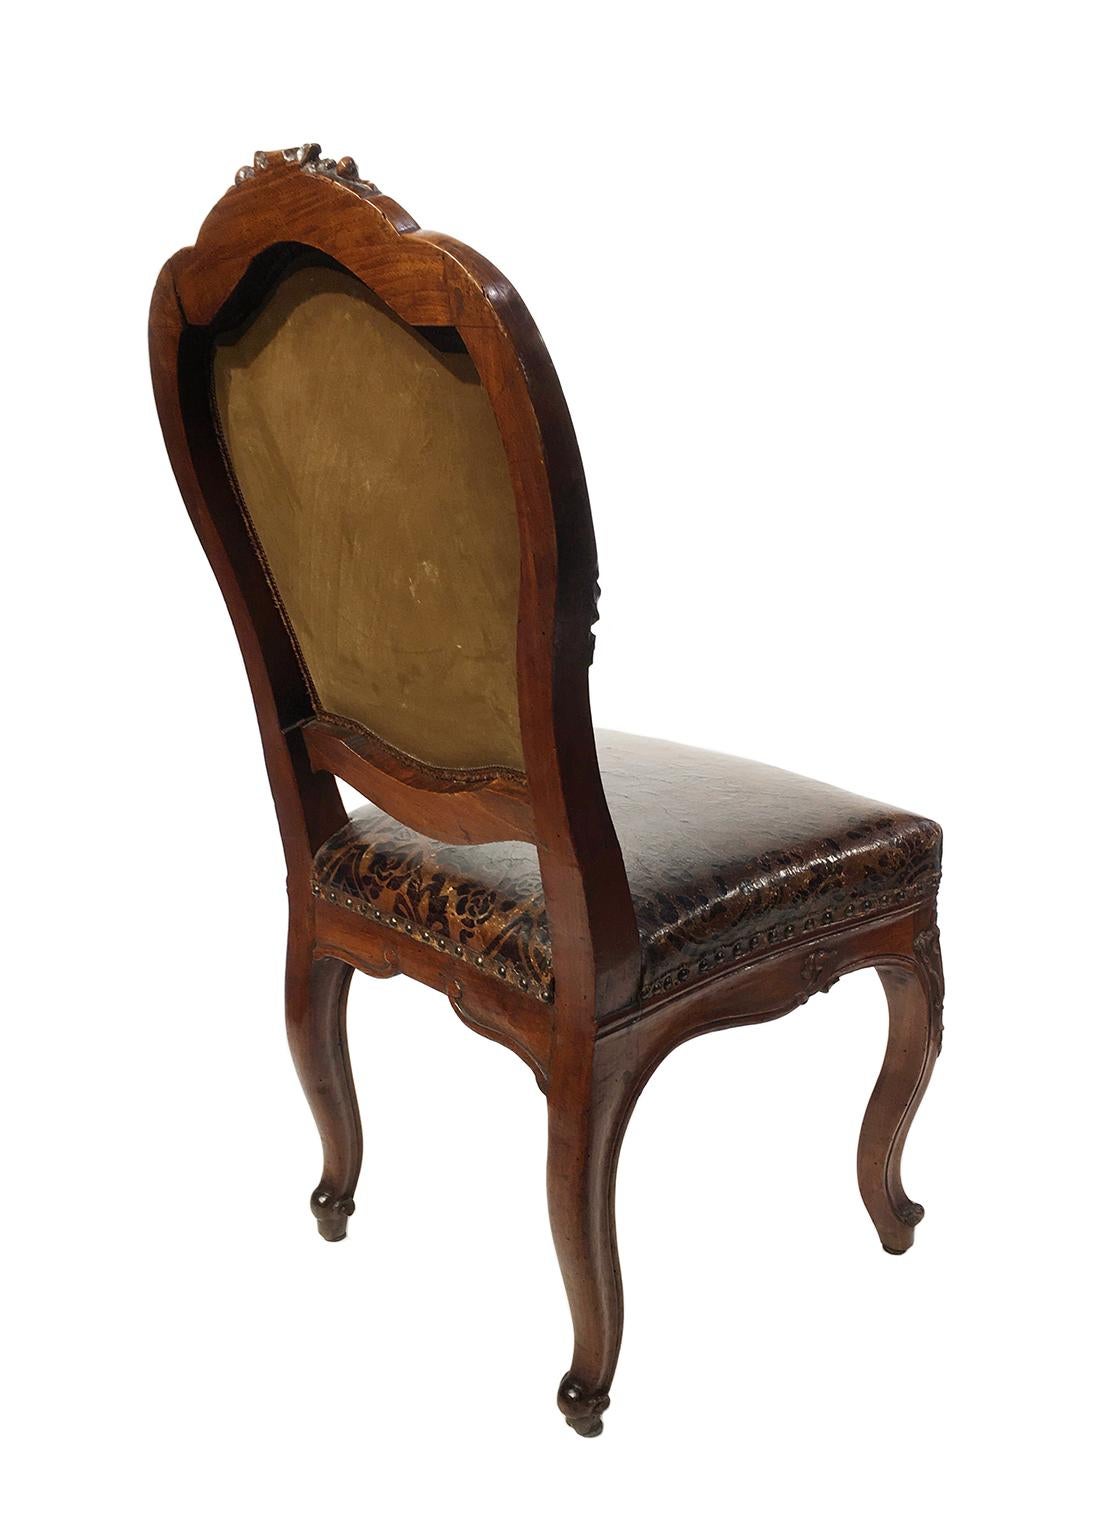 Italian Carved Walnut Chairs with Leather Covers, Milan, circa 1750 For Sale 3